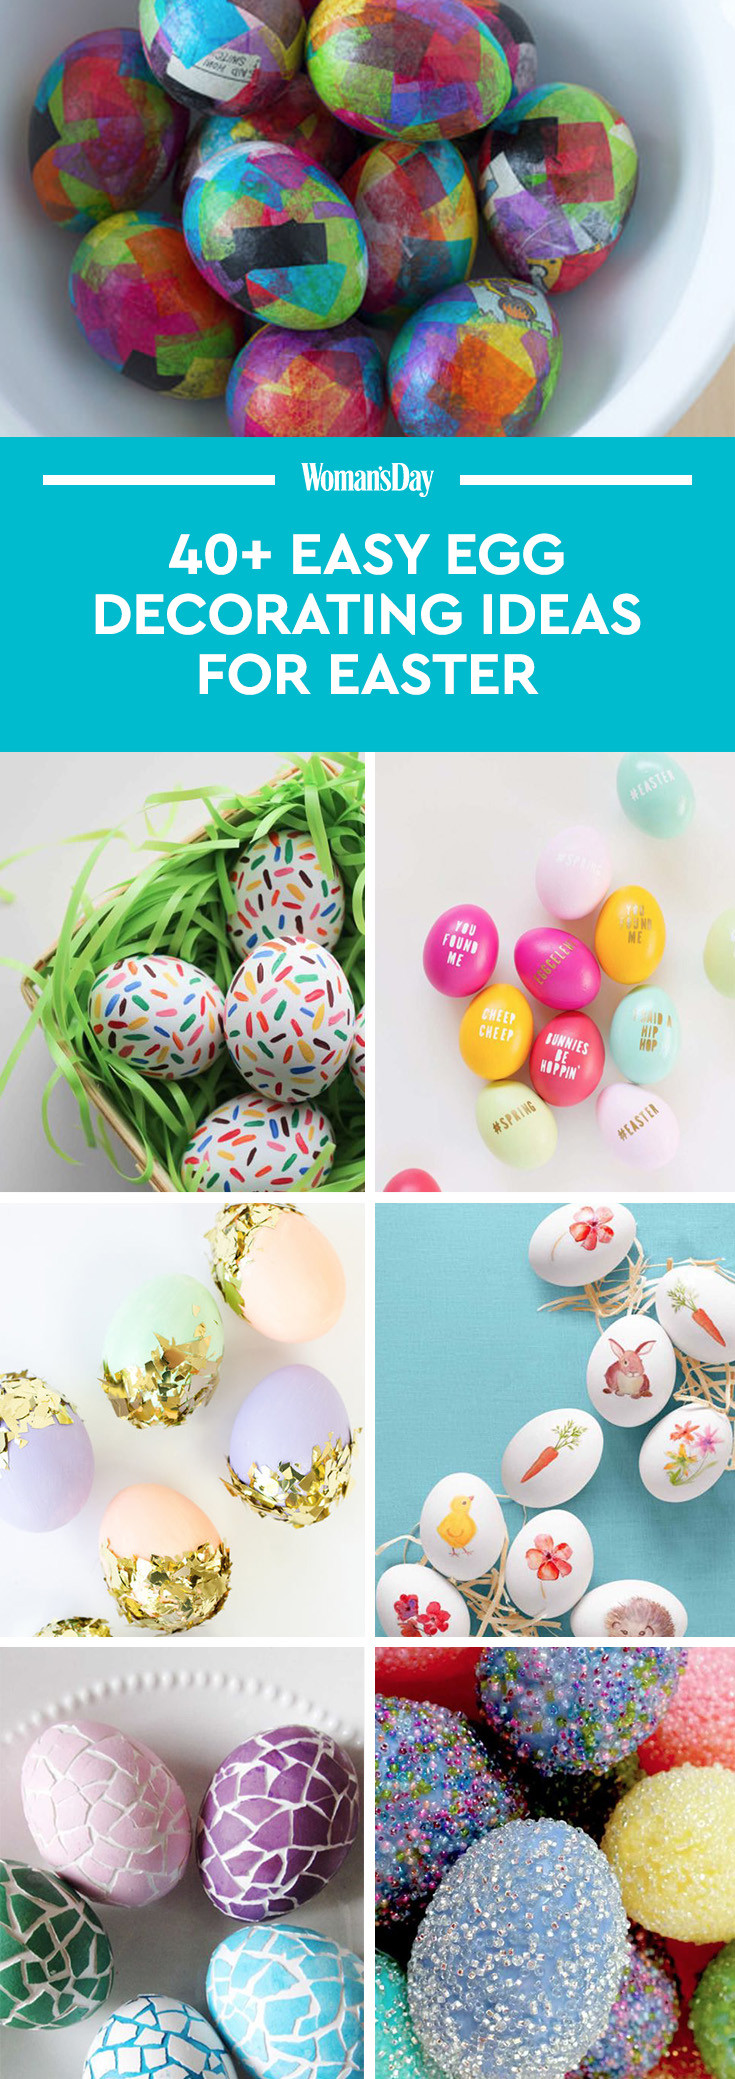 Easter Egg Decoration Ideas
 42 Cool Easter Egg Decorating Ideas Creative Designs for